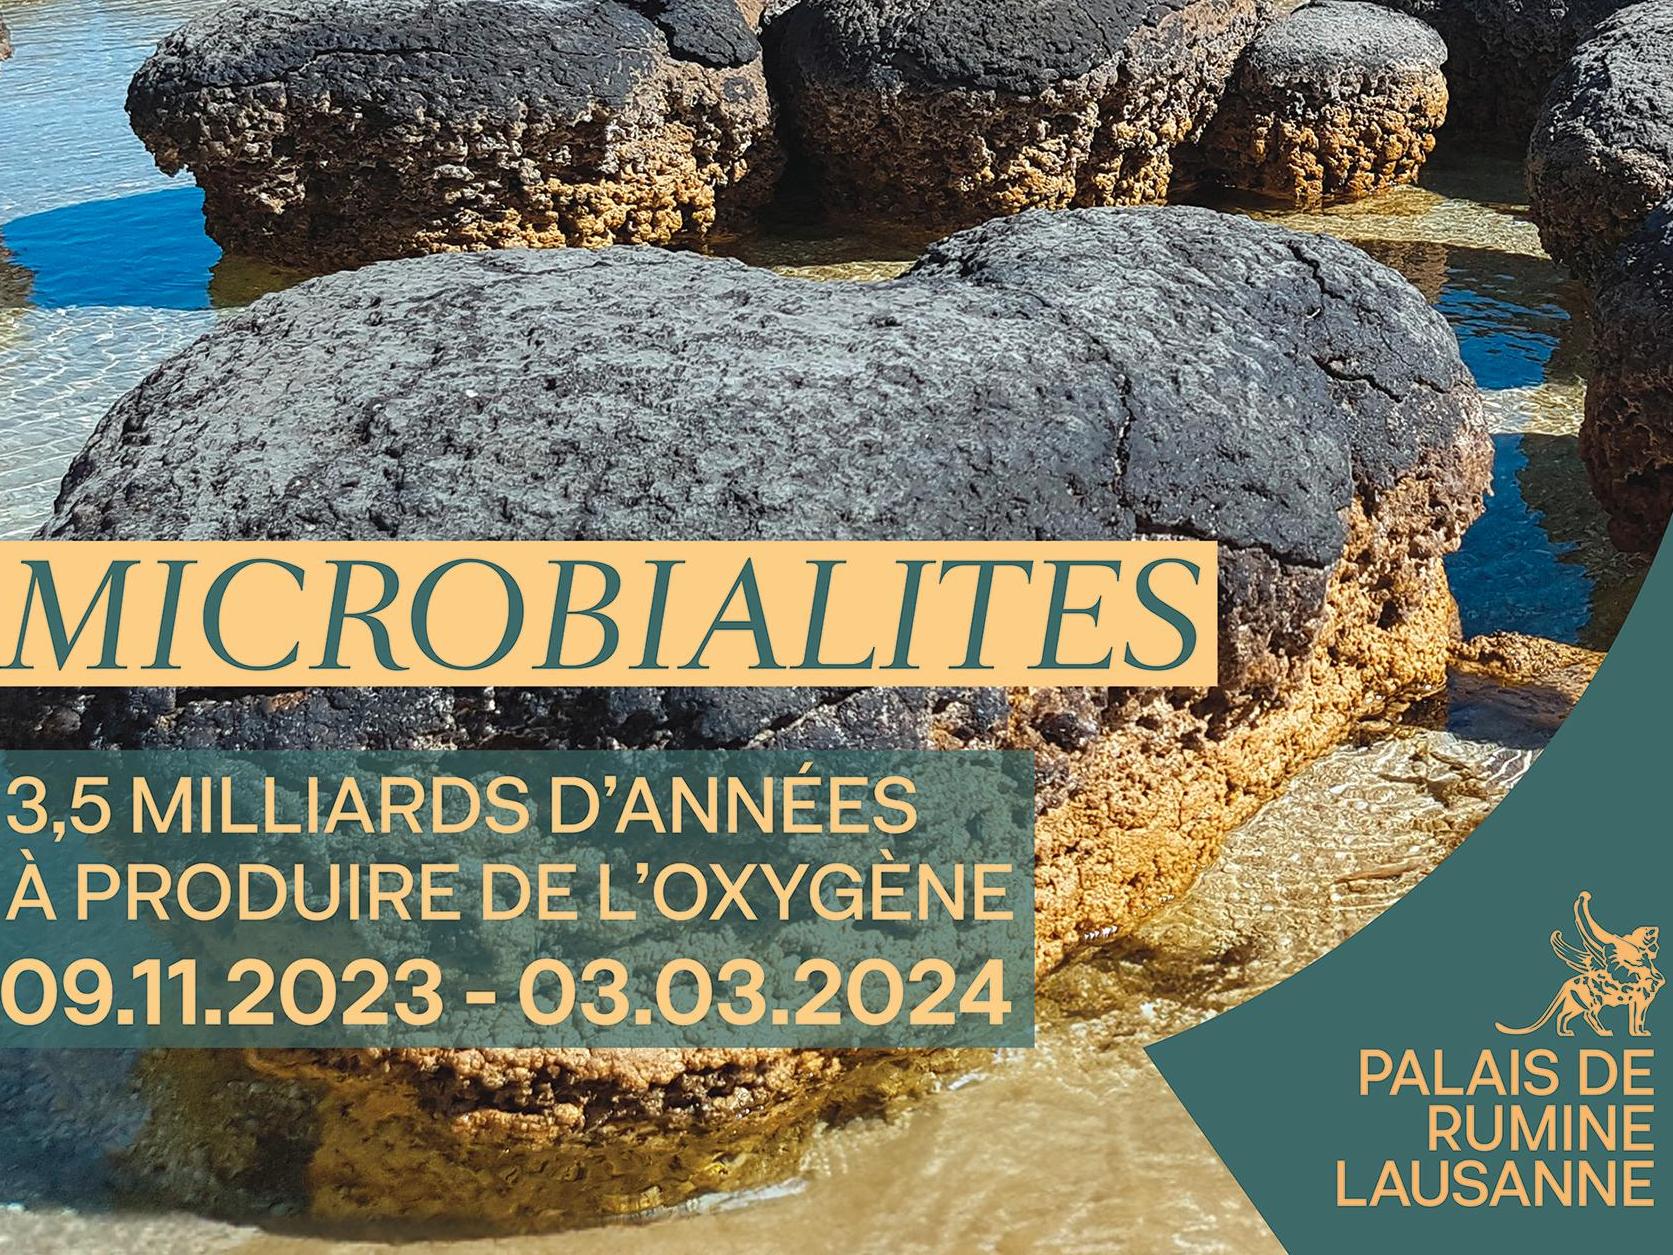 MICROBIALITES, l'exposition